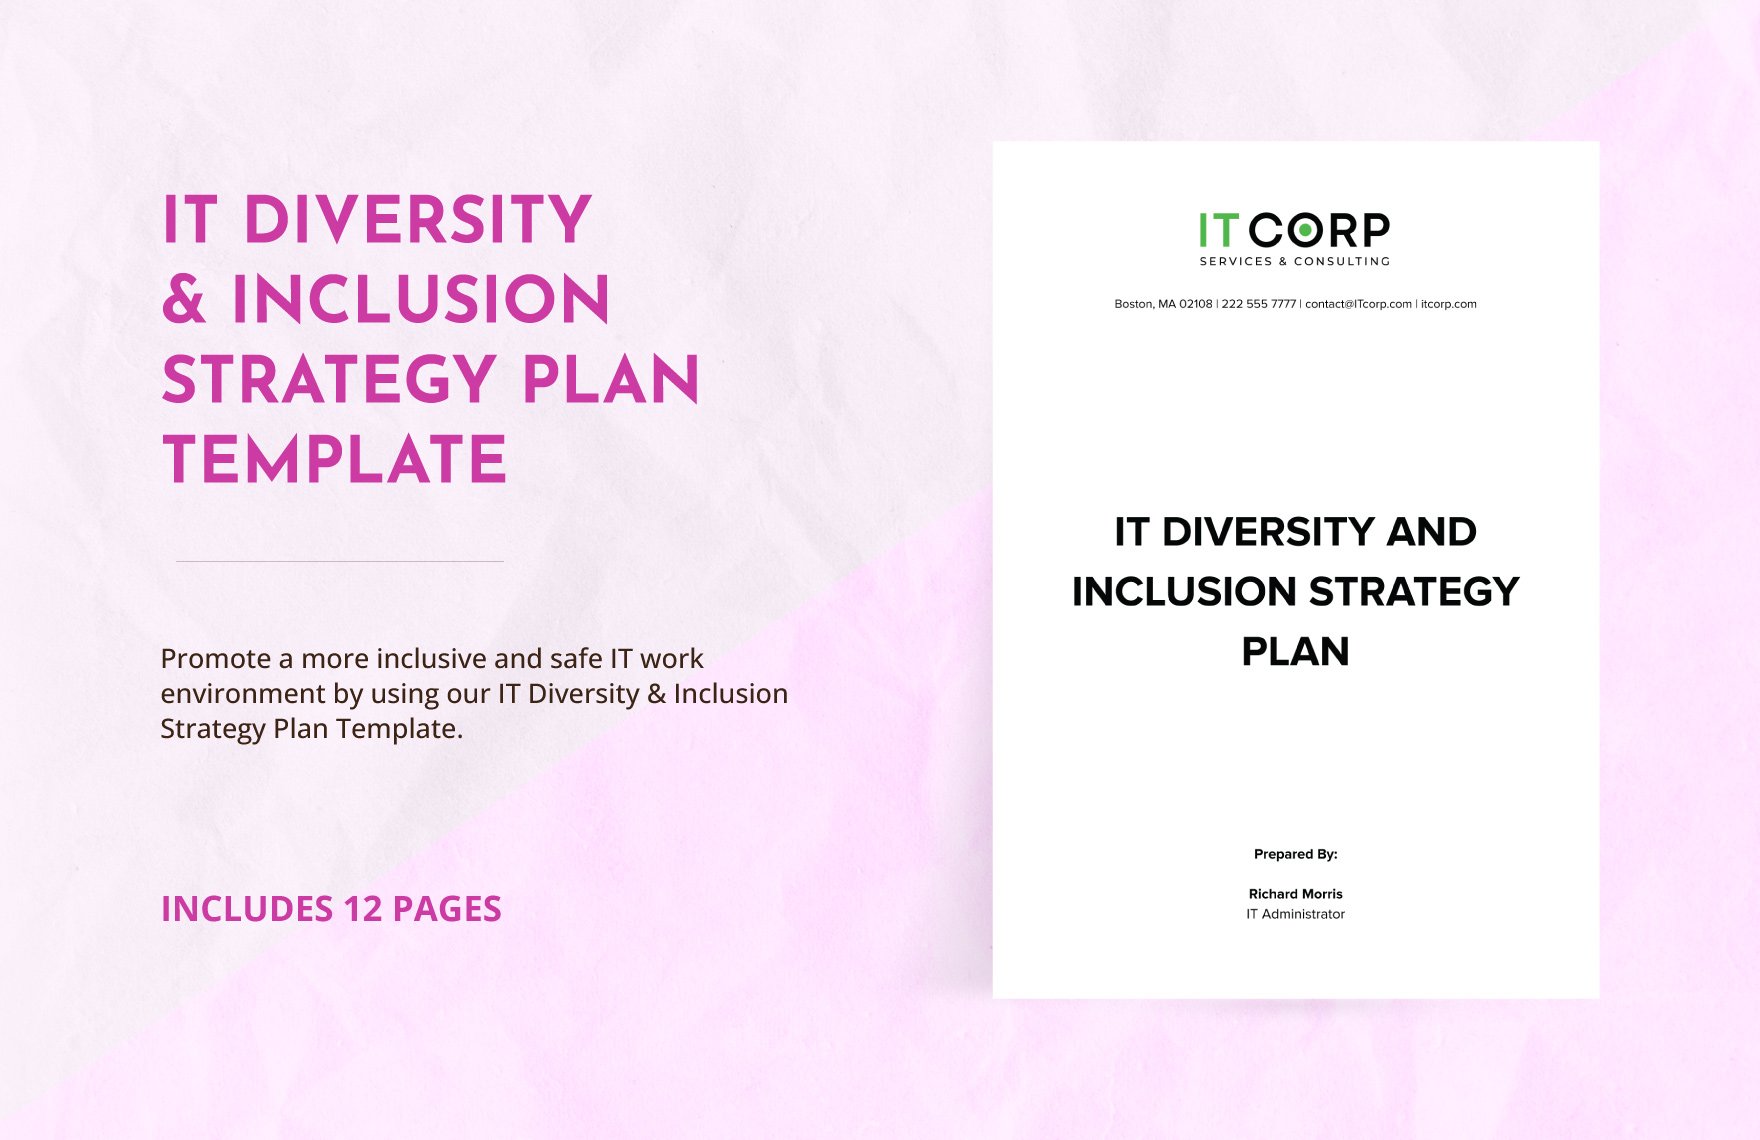 IT Diversity & Inclusion Strategy Plan Template